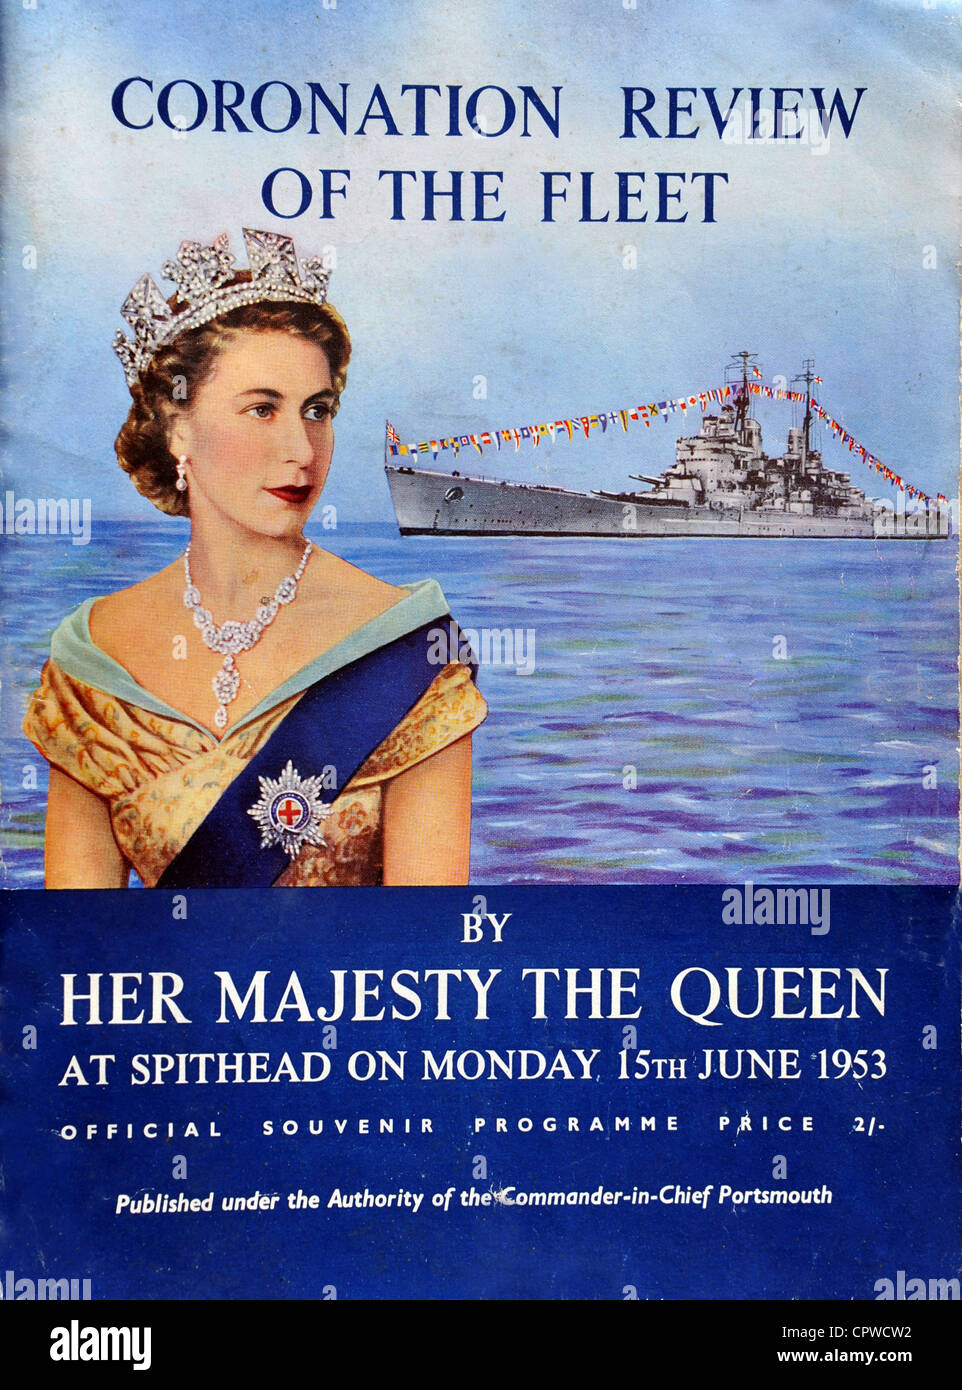 Coronation Naval Fleet Review programme at Spithead near Portsmouth for Queen Elizabeth II from 1953. Britain. Stock Photo